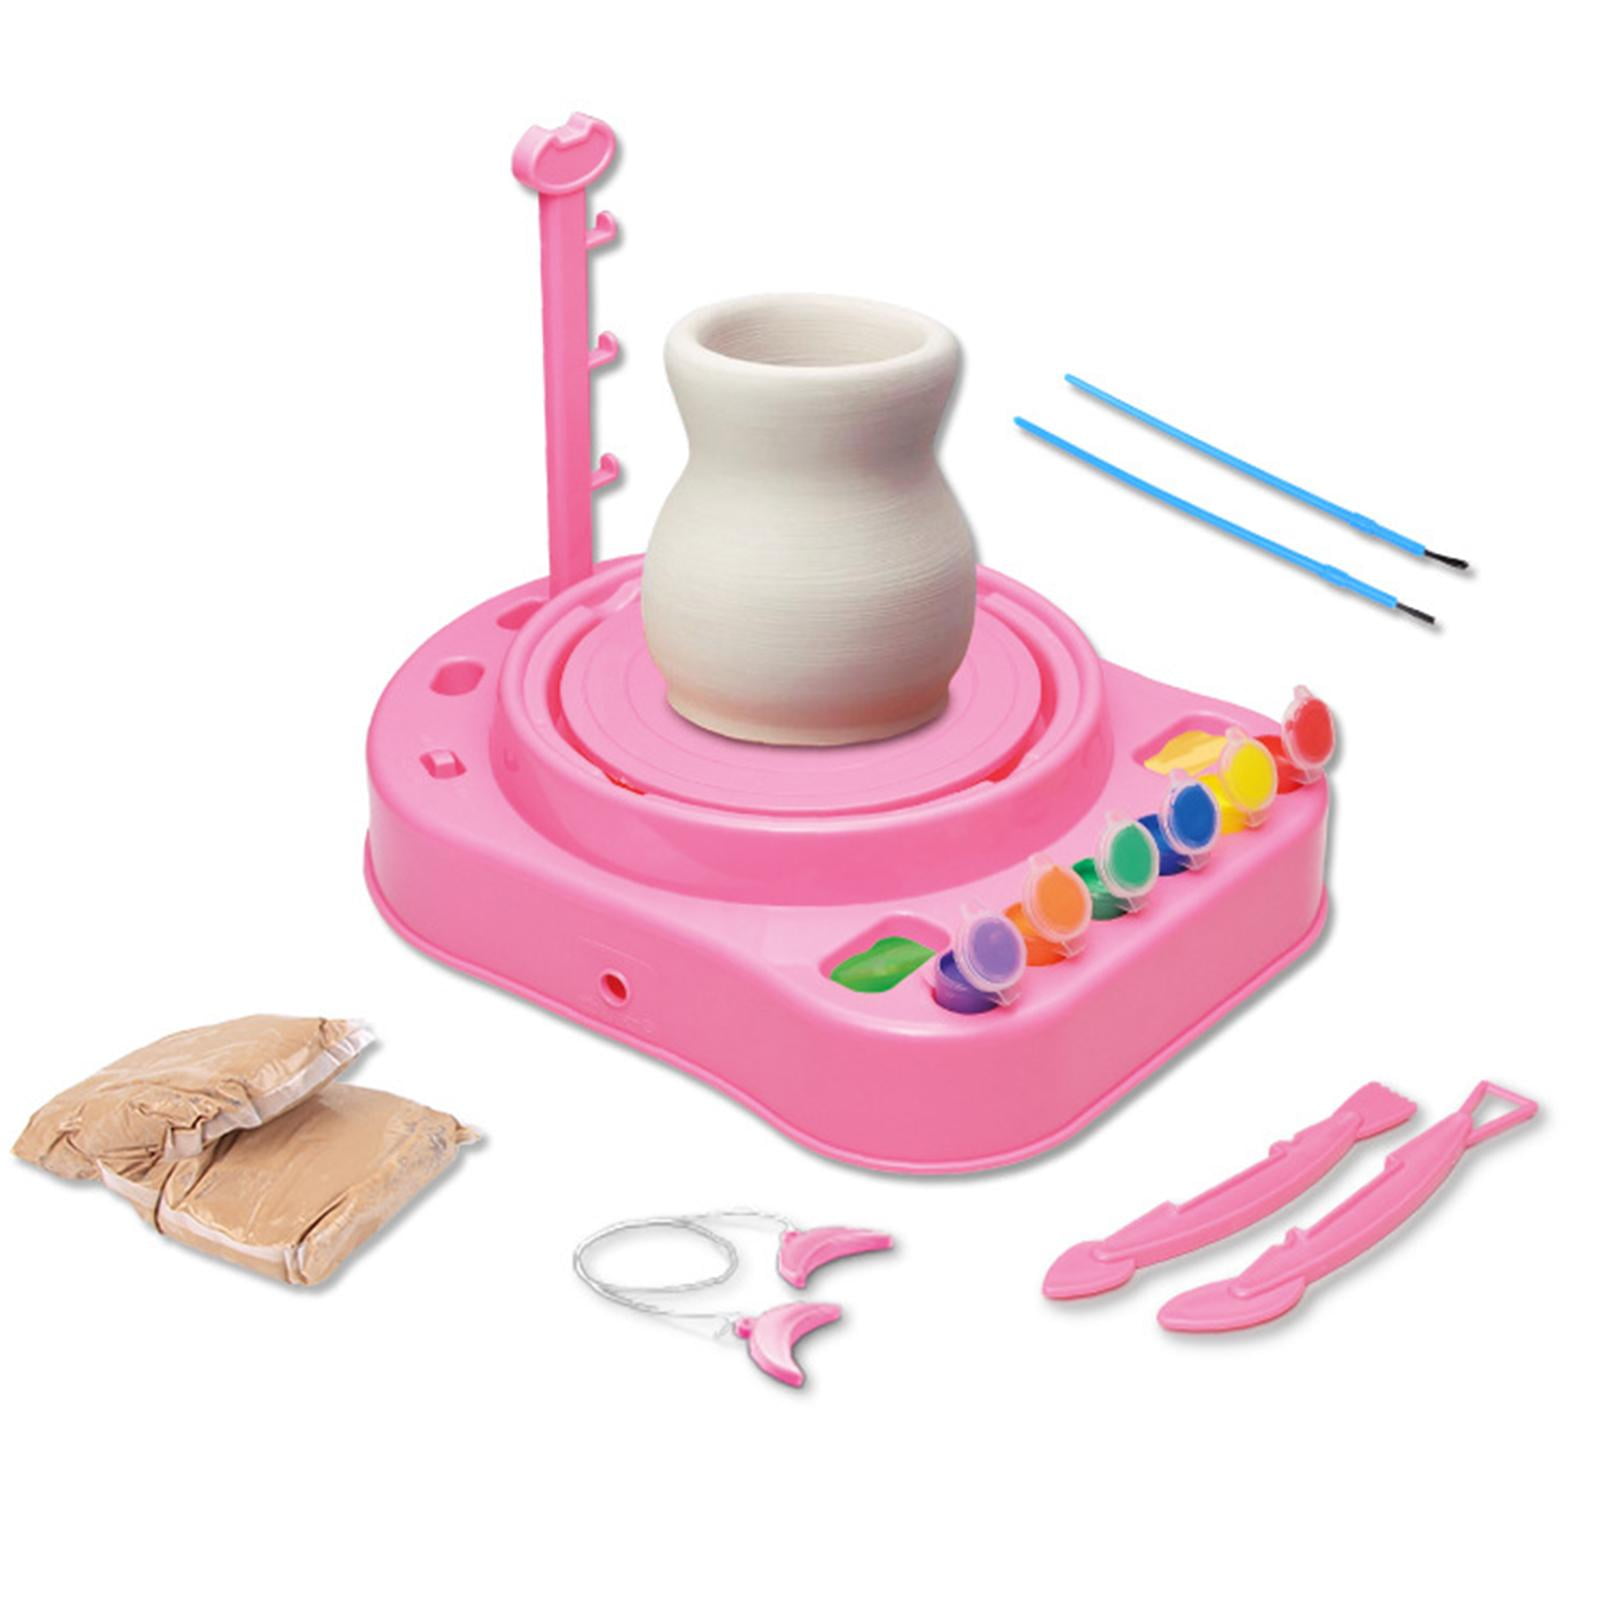 Details about   Machine Ceramic Kit Clay Wheel Pottery Wheel for Children Home Toy Without Clay 